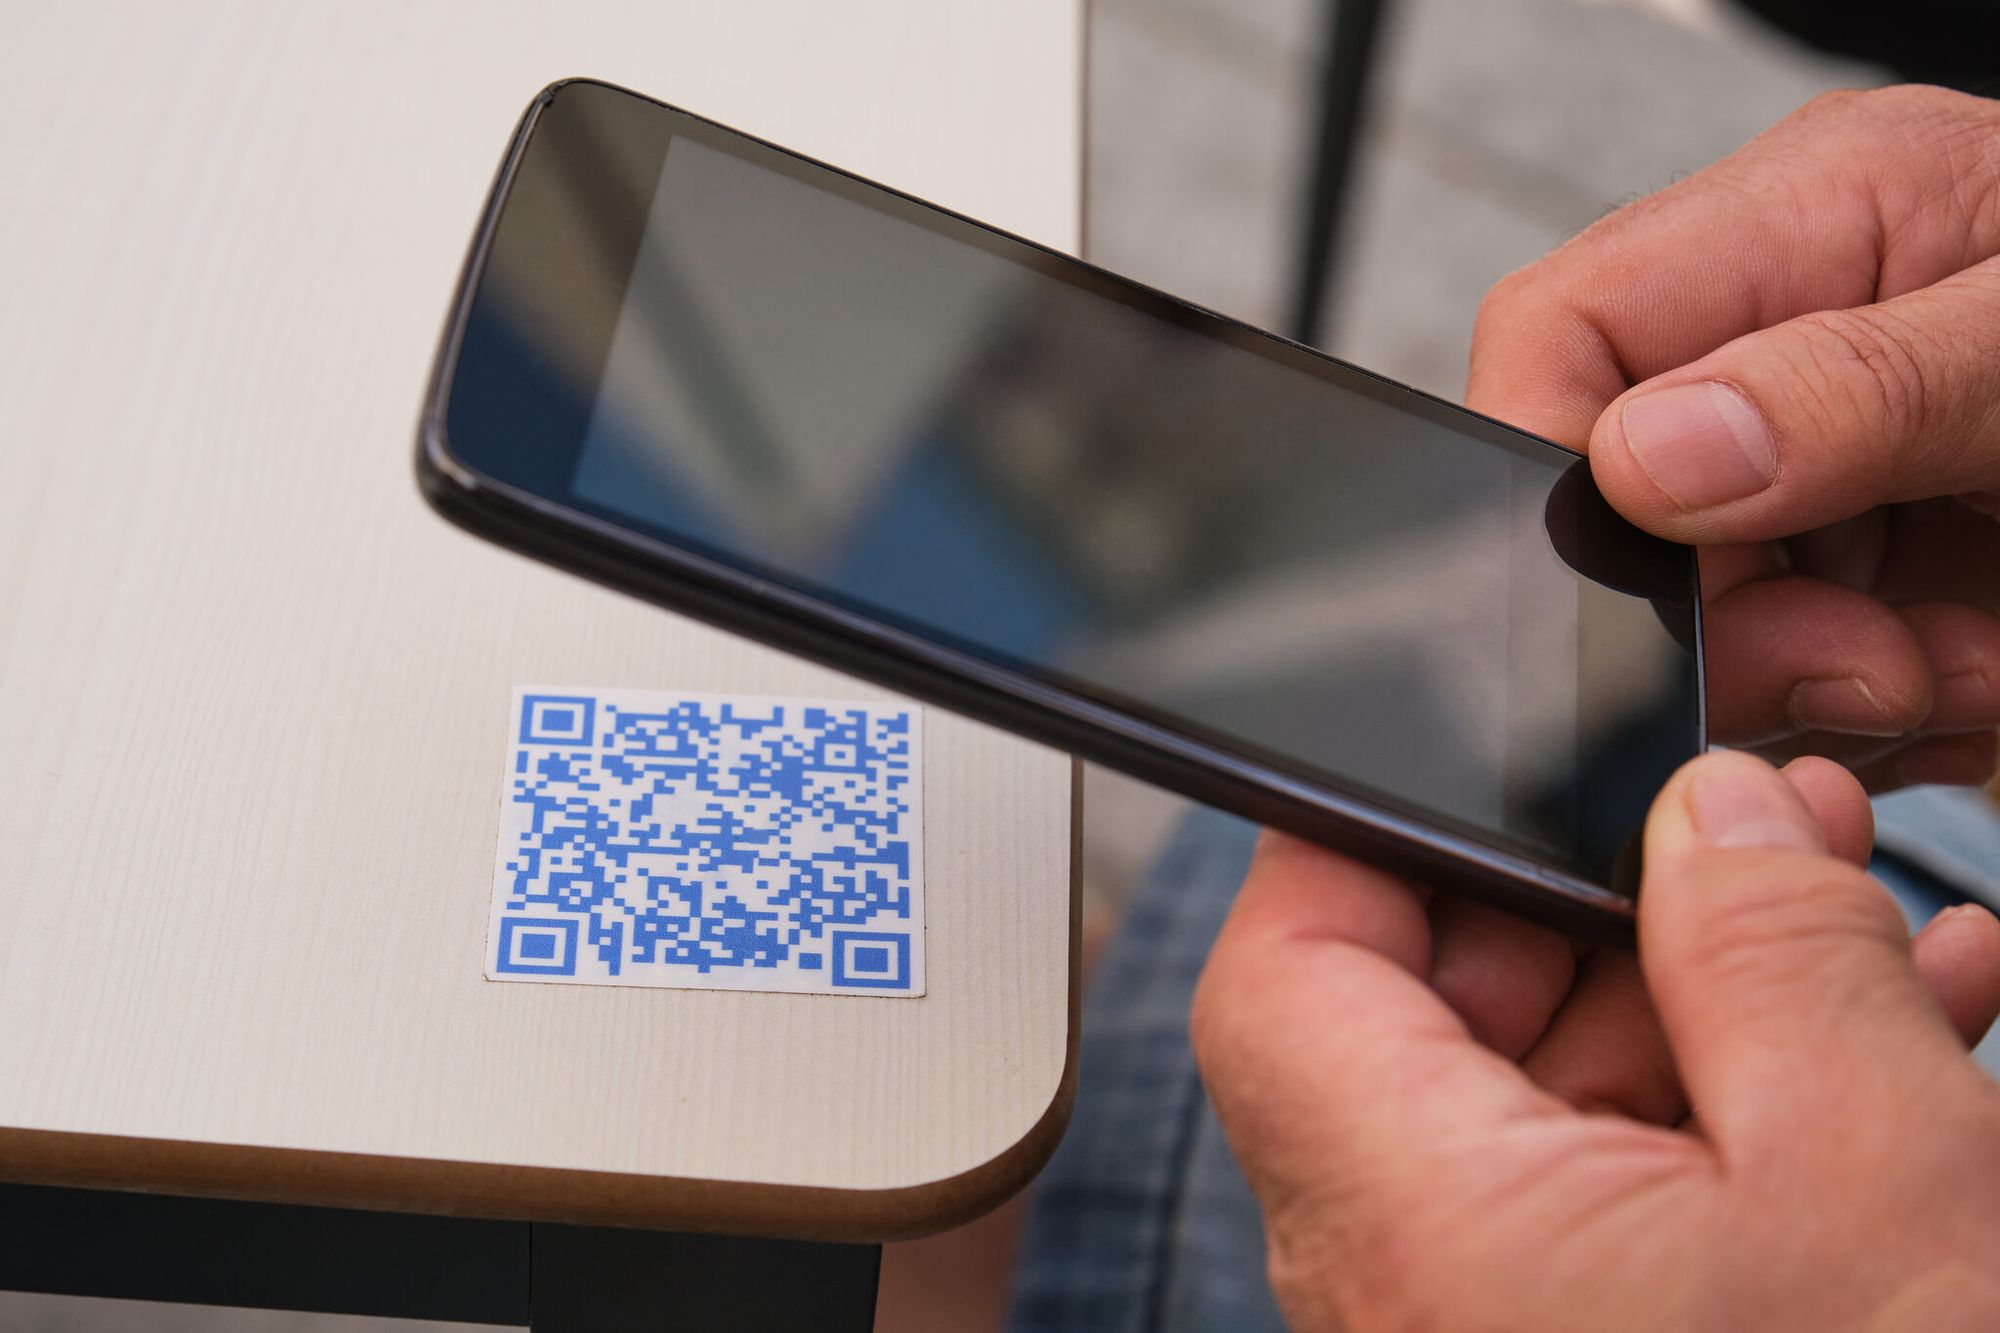 Man's hand using the smartphone to scan the QR code